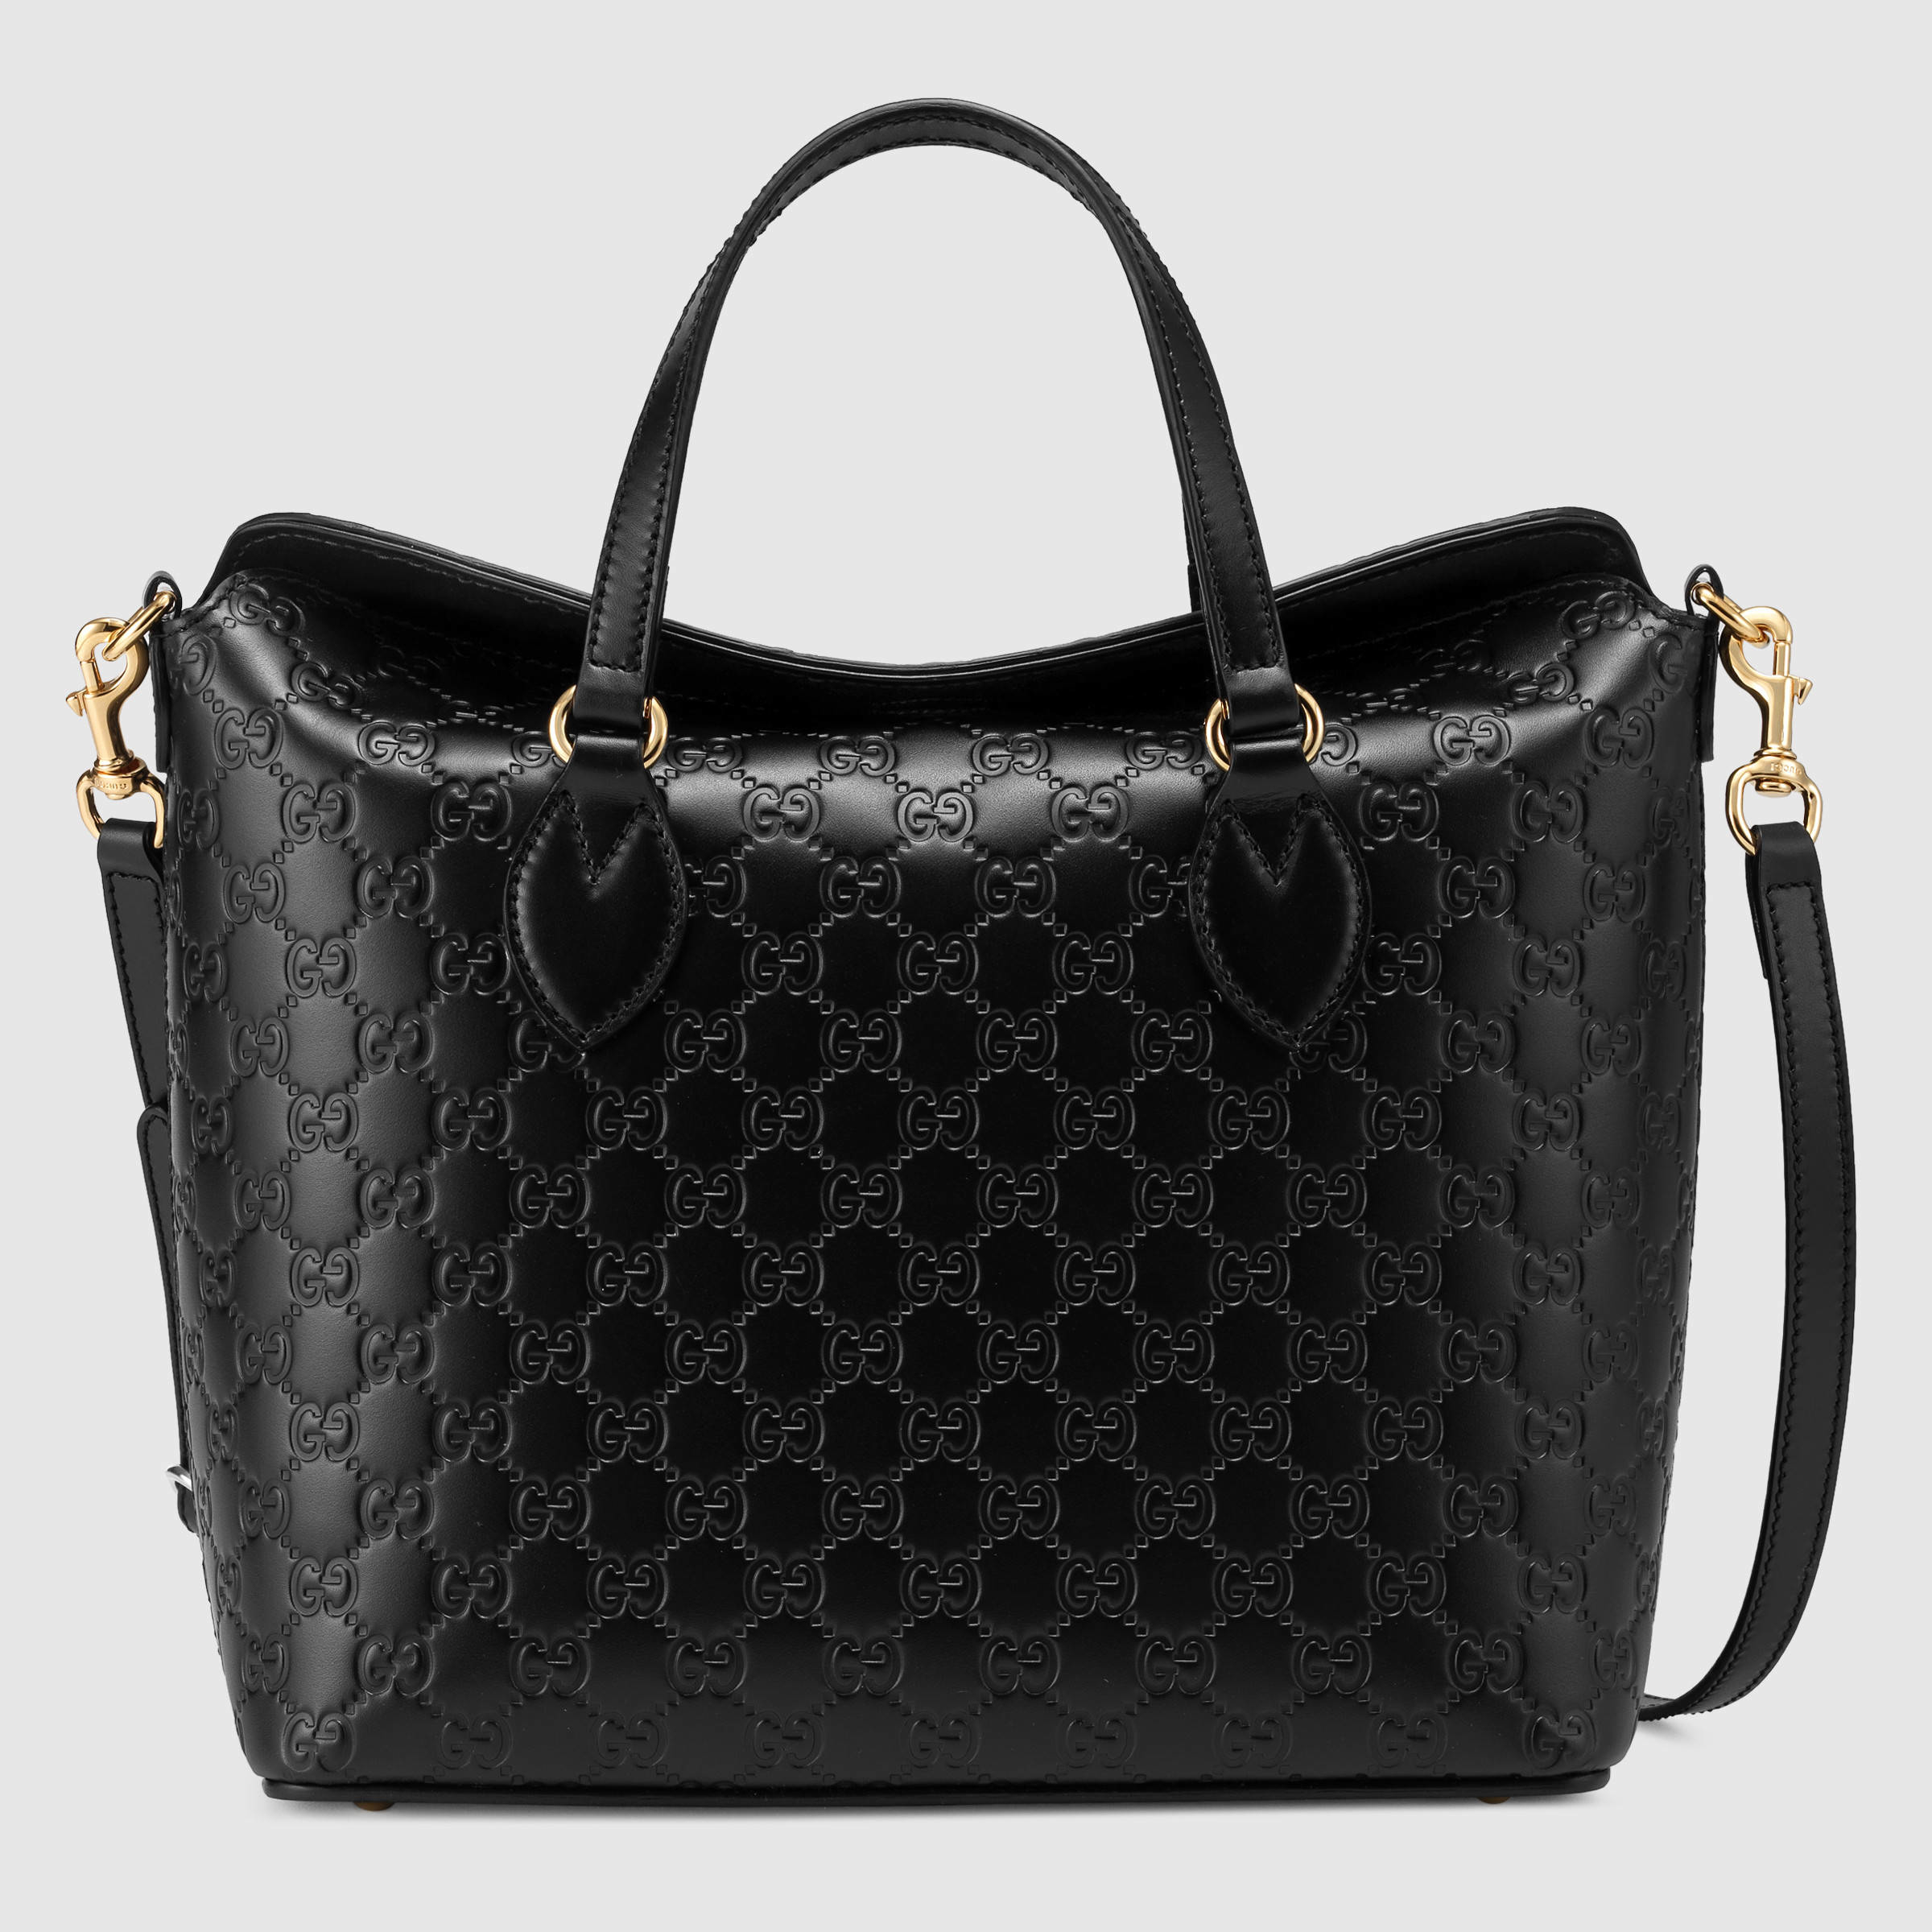 Gucci Signature Leather Tote Bag in Black | Lyst